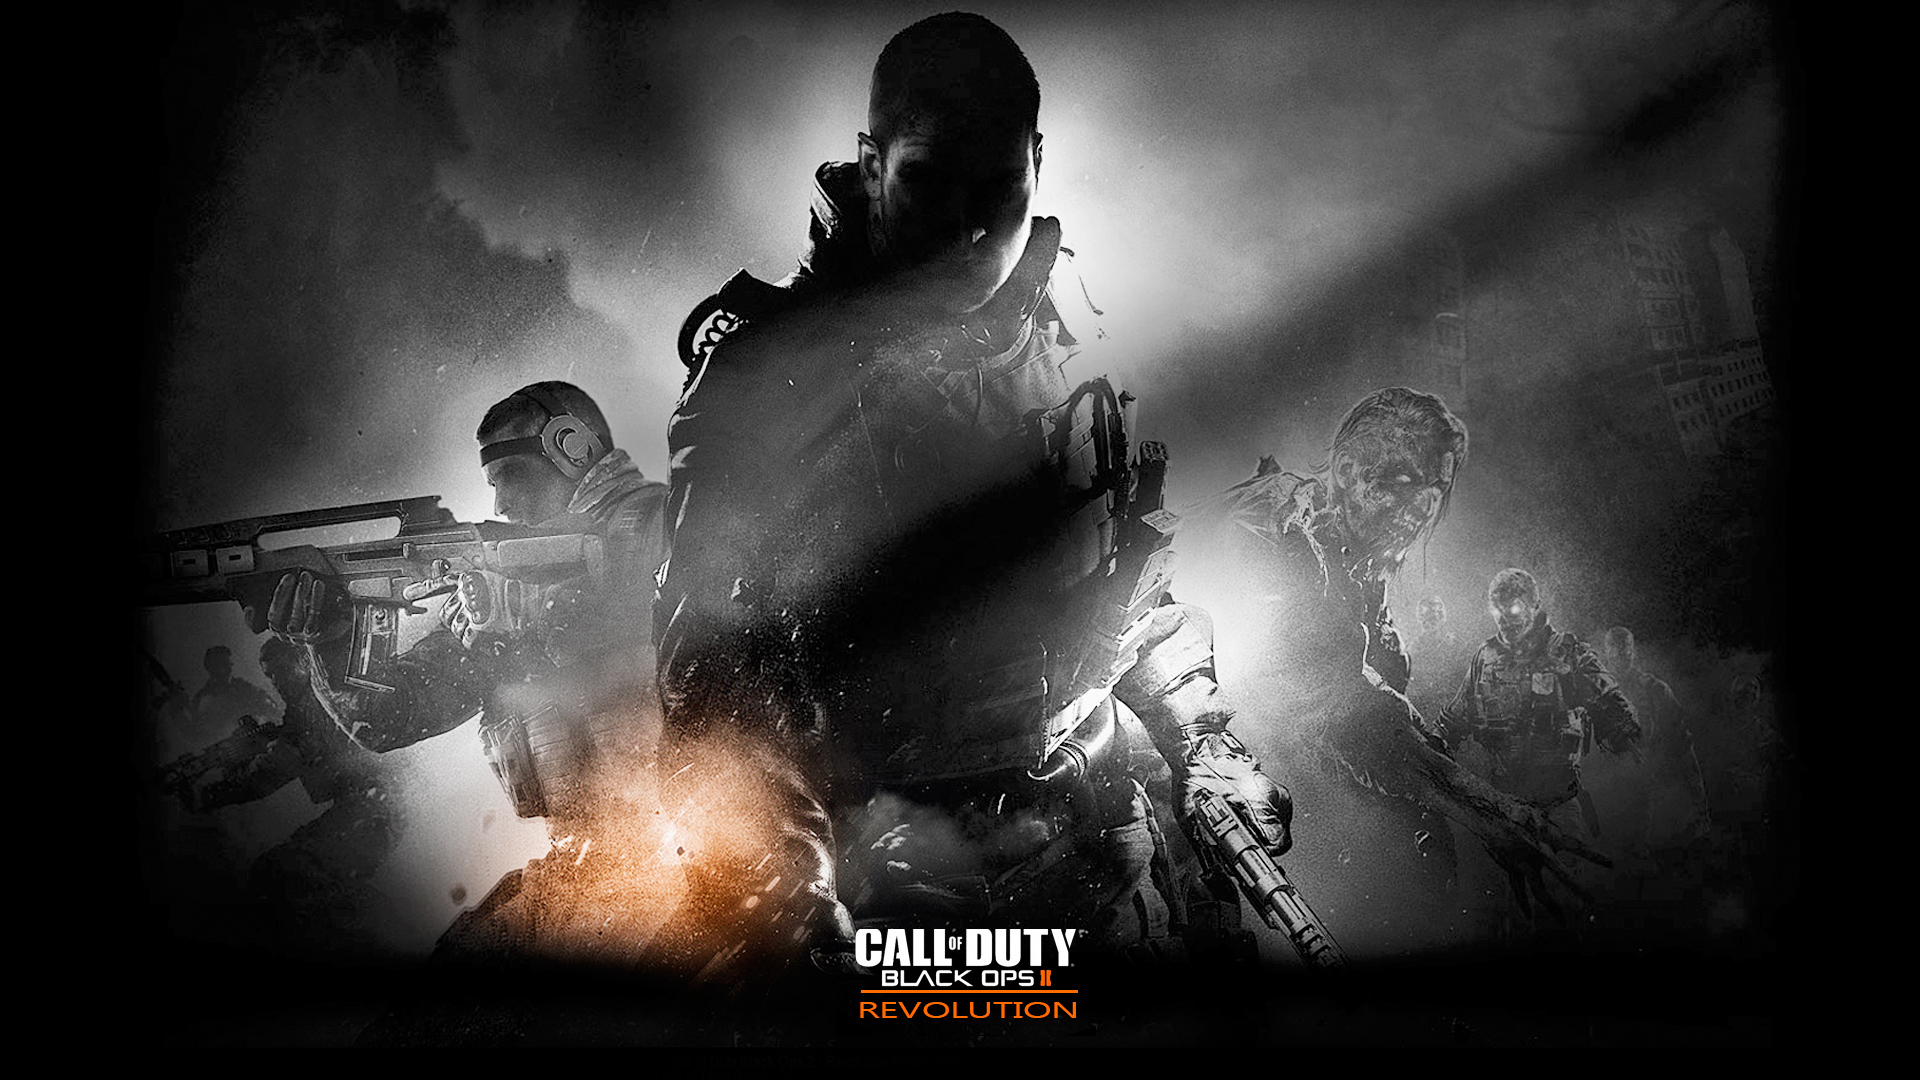 Gallery For > Call Of Duty Black Ops 2 Wallpapers